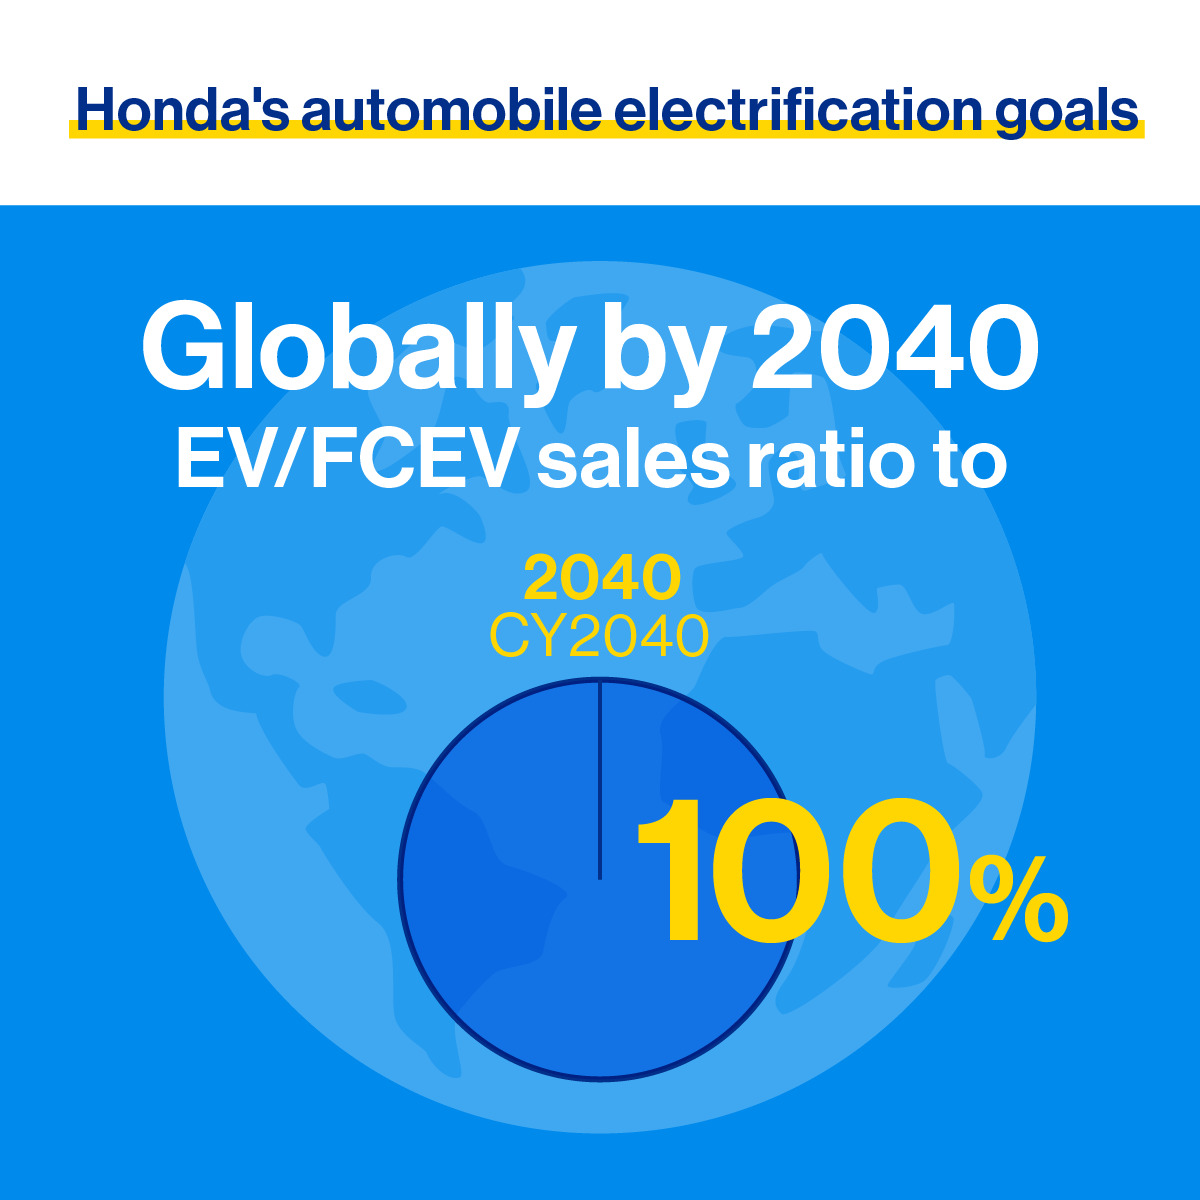 Honda's goal is to achieve EV/FCEV sales ratio to 100% globally by 2040